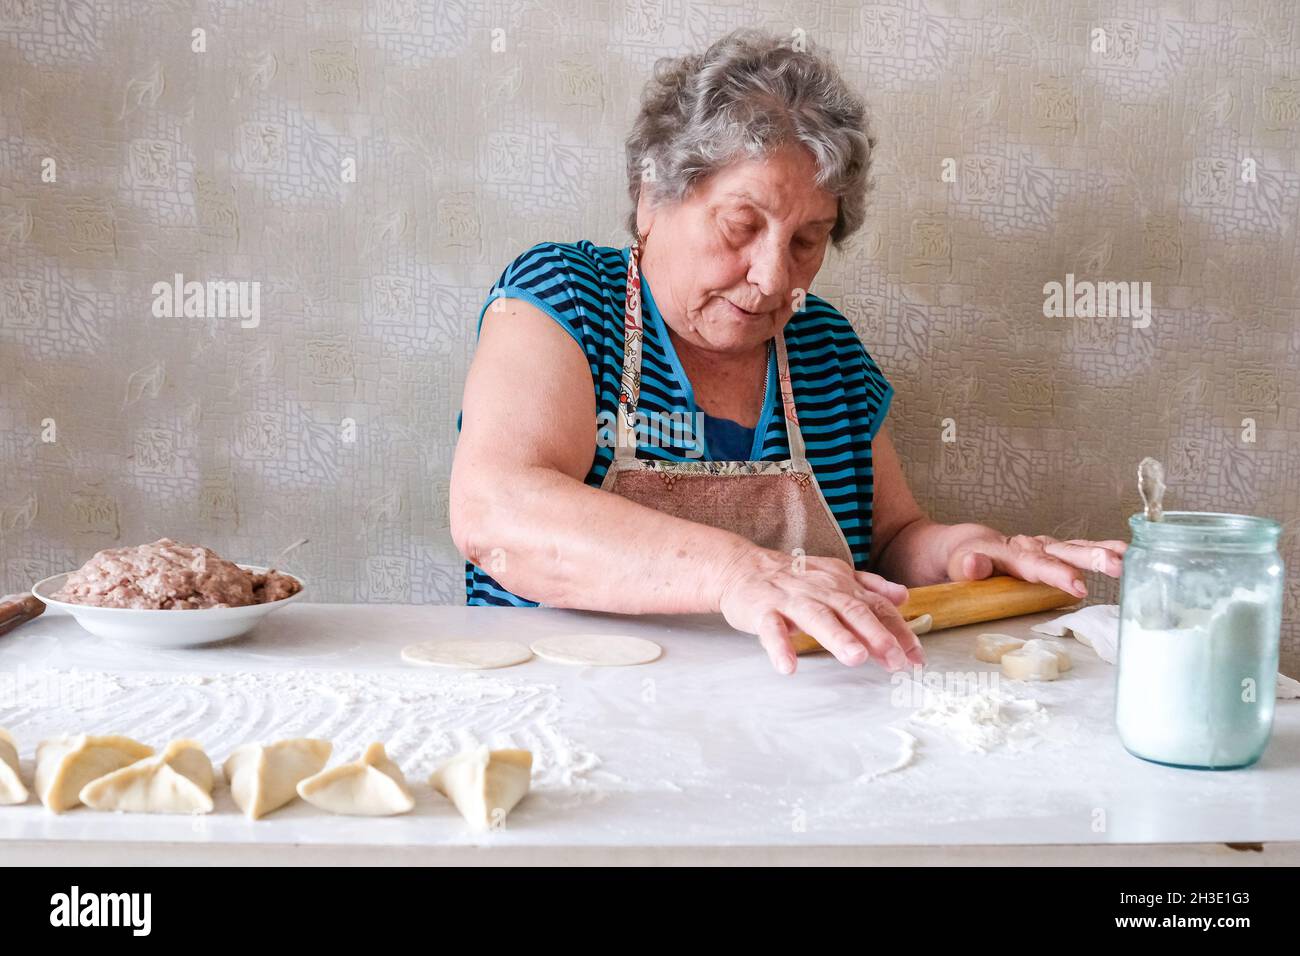 Grandmother makes manti, rolls dough for a dish Stock Photo